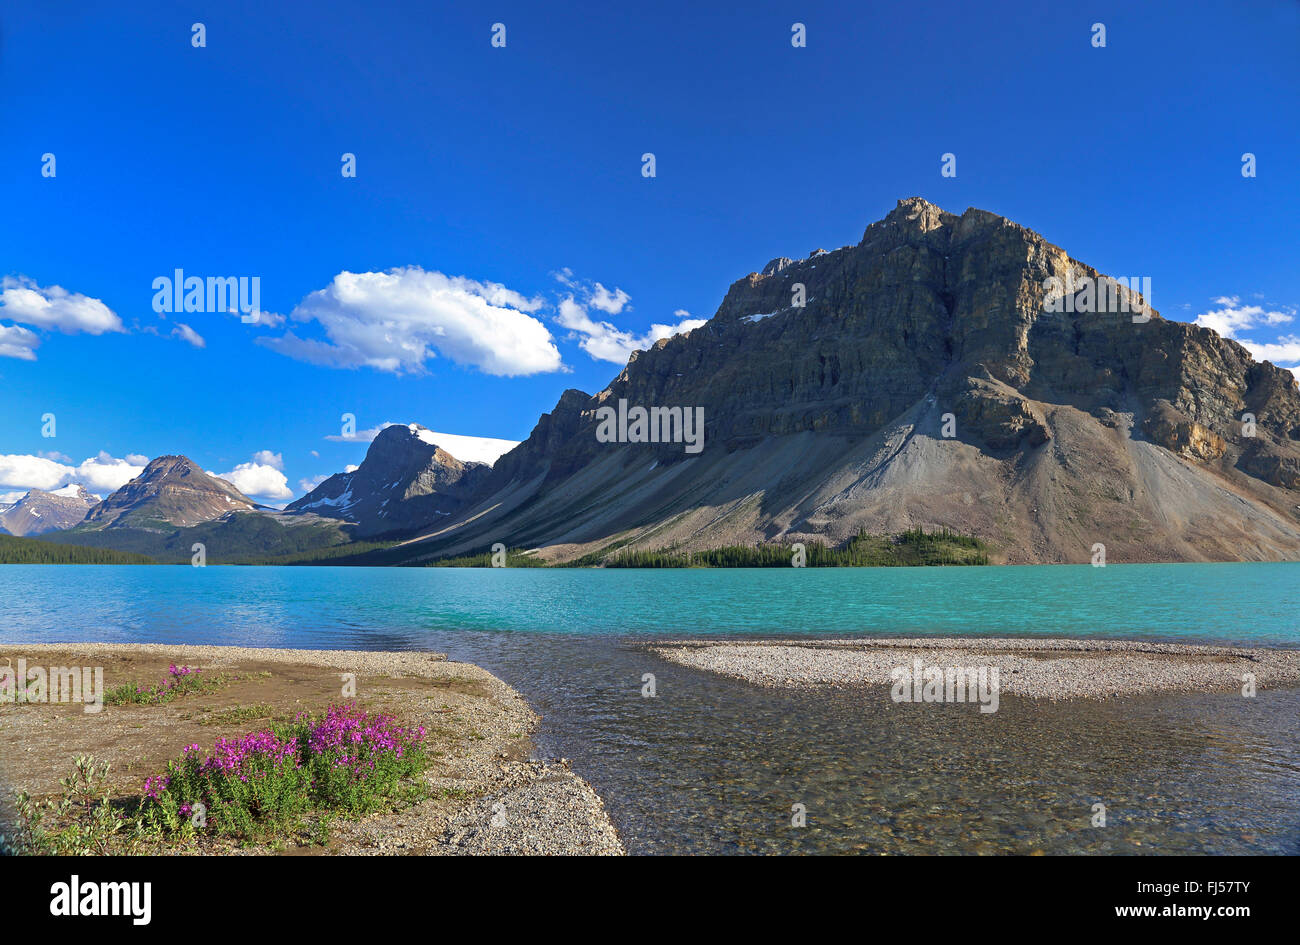 Bow Lake and Bow Mountain in the Rocky Mountains, Canada, Alberta, Banff National Park Stock Photo